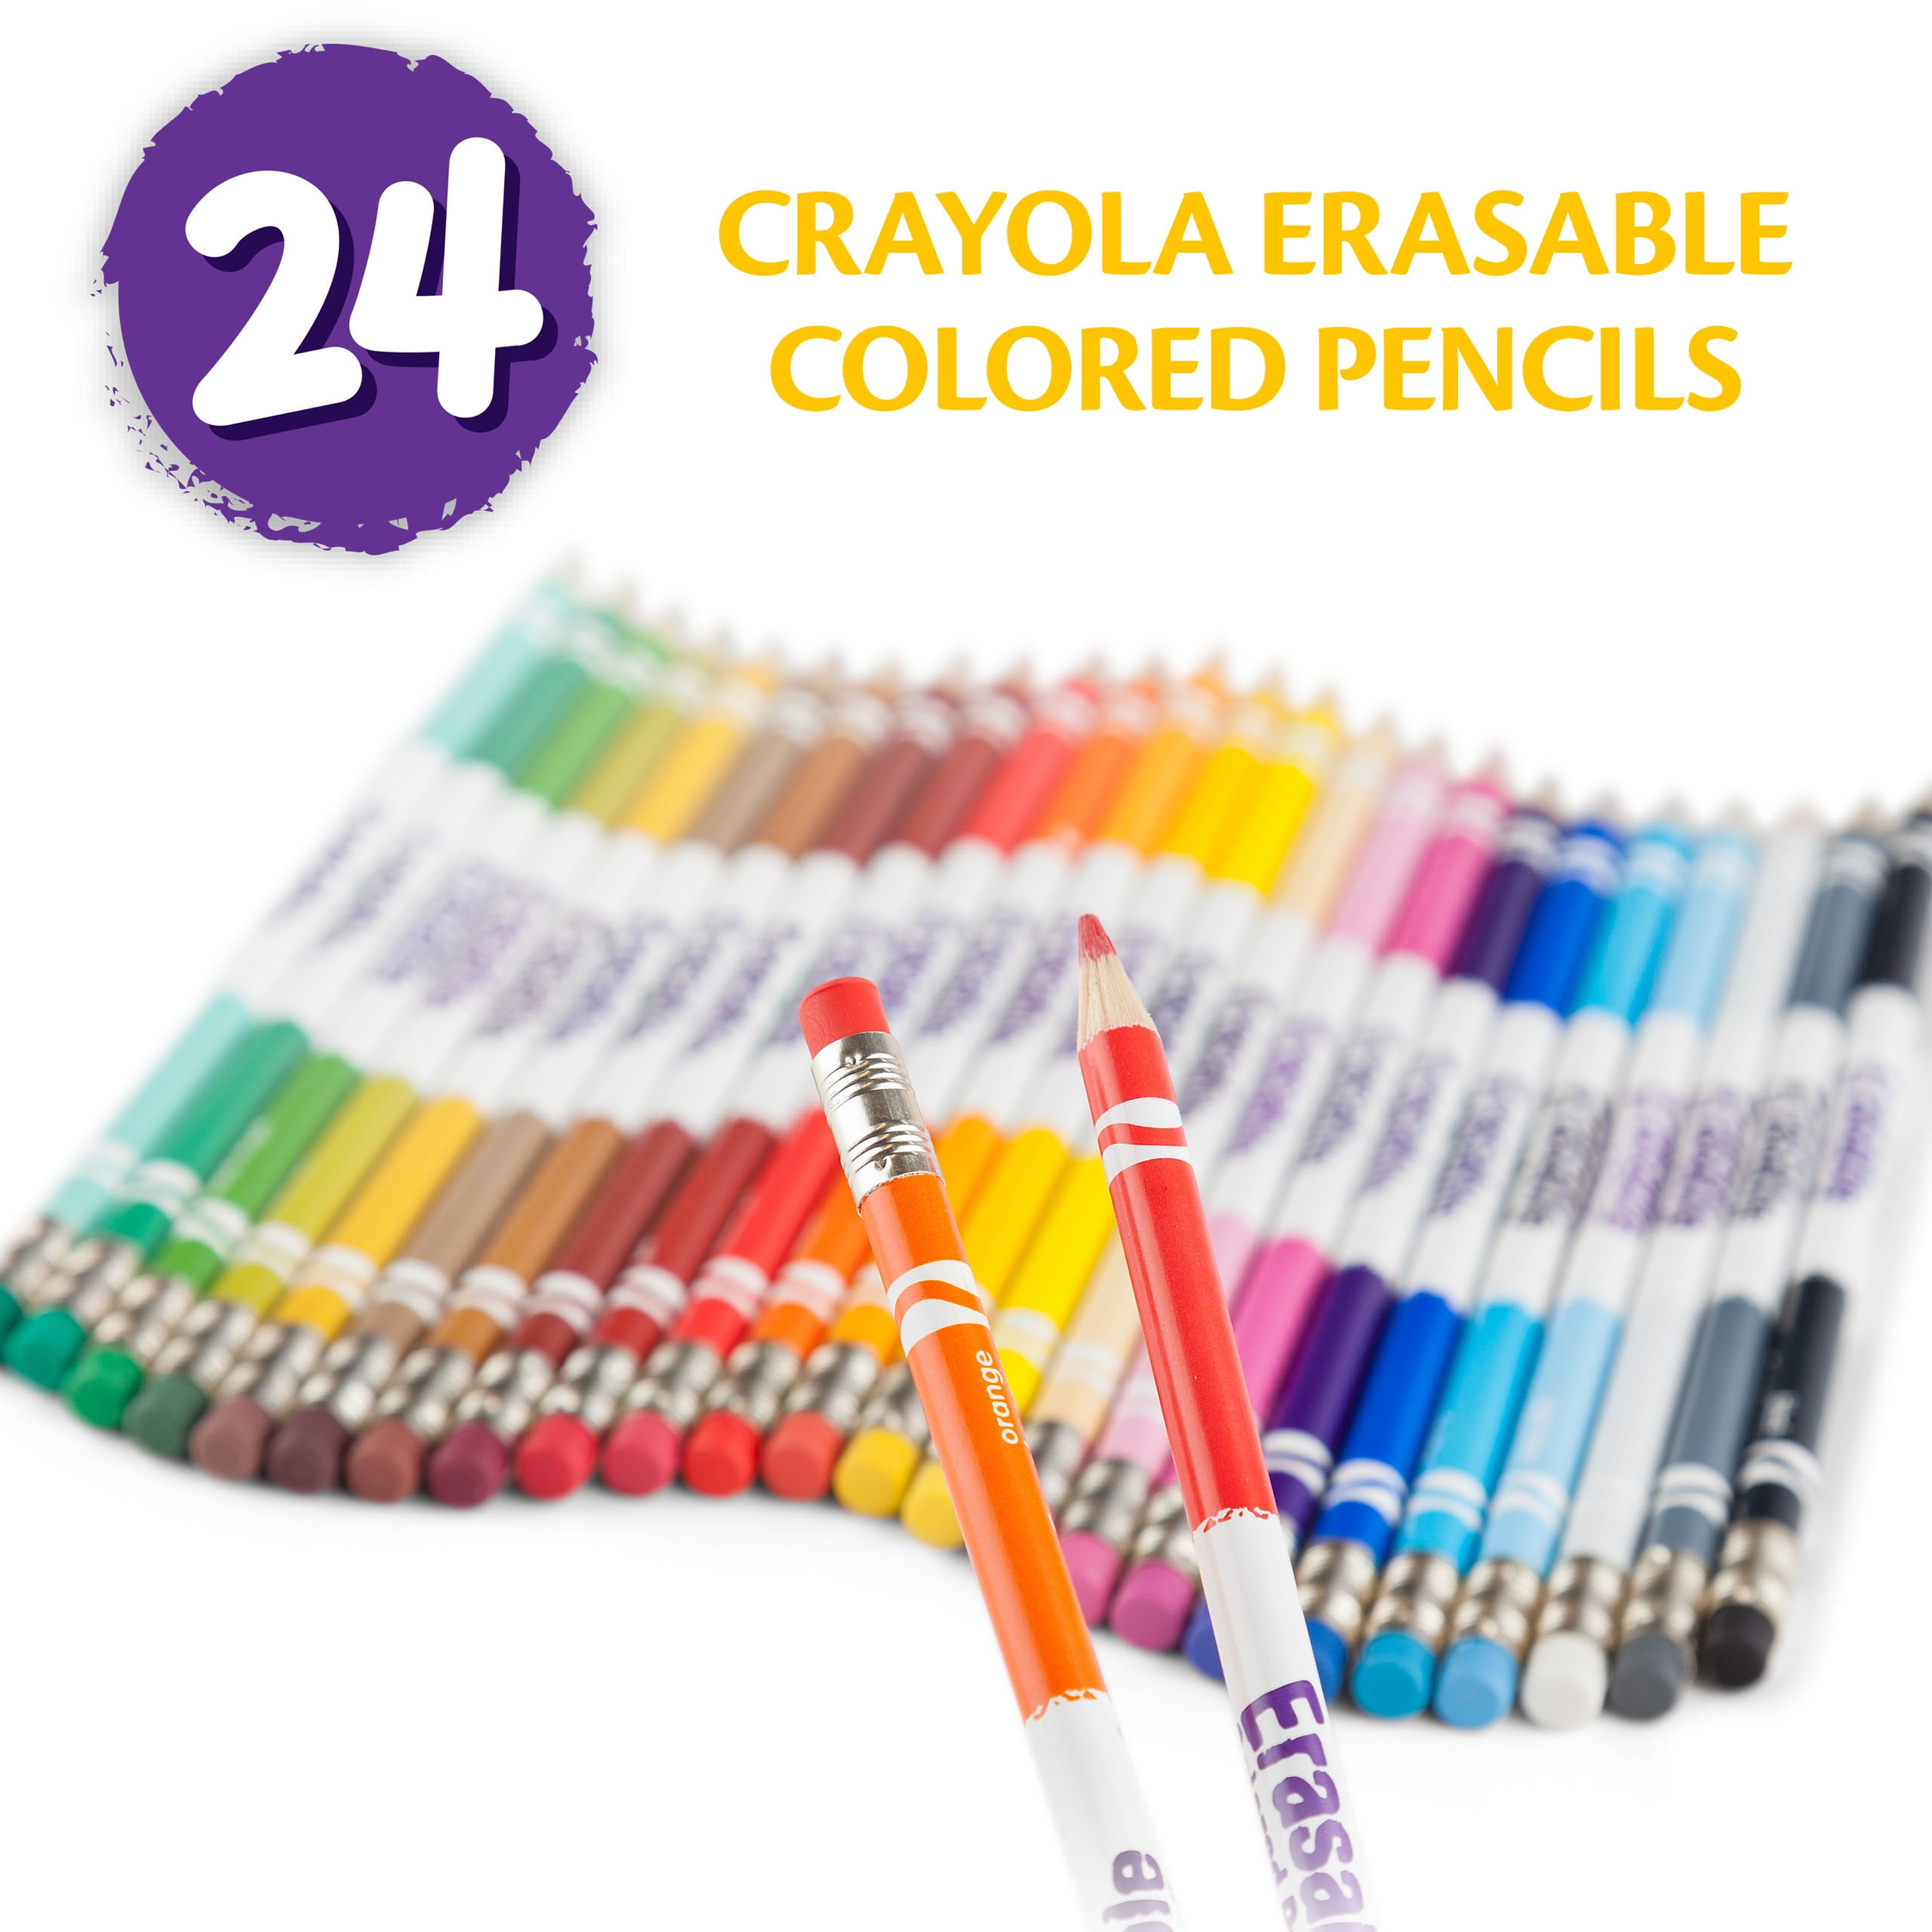 Walmart Ebensburg - Crayola Colors of the World crayons, markers and  colored pencils contain 24 new colors that represent people of all over the  world! 🌍✌🏻✌🏼✌🏽✌🏾✌🏿